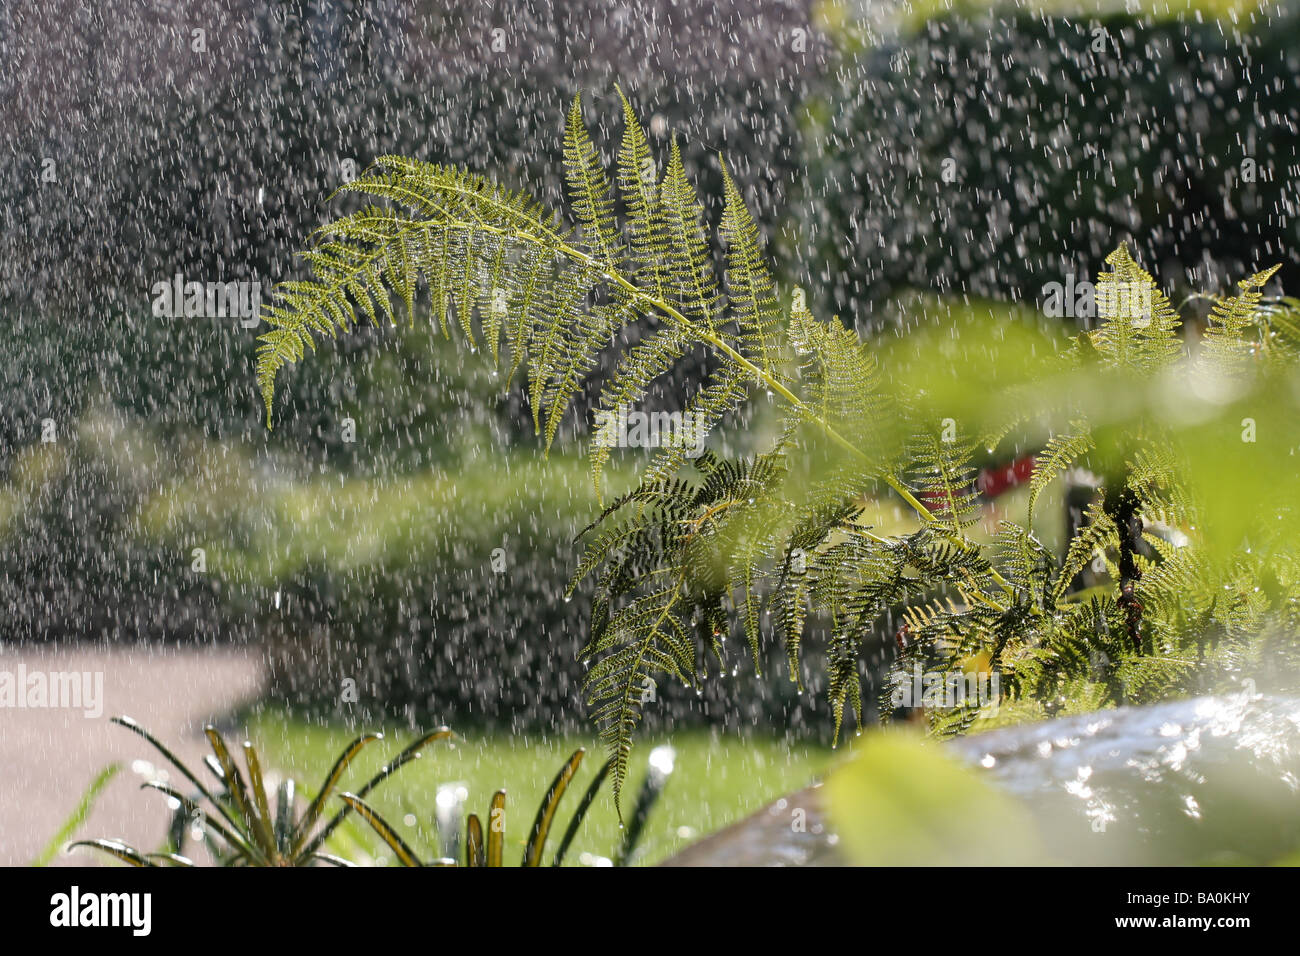 Water from sprinkler falling on ferns Stock Photo